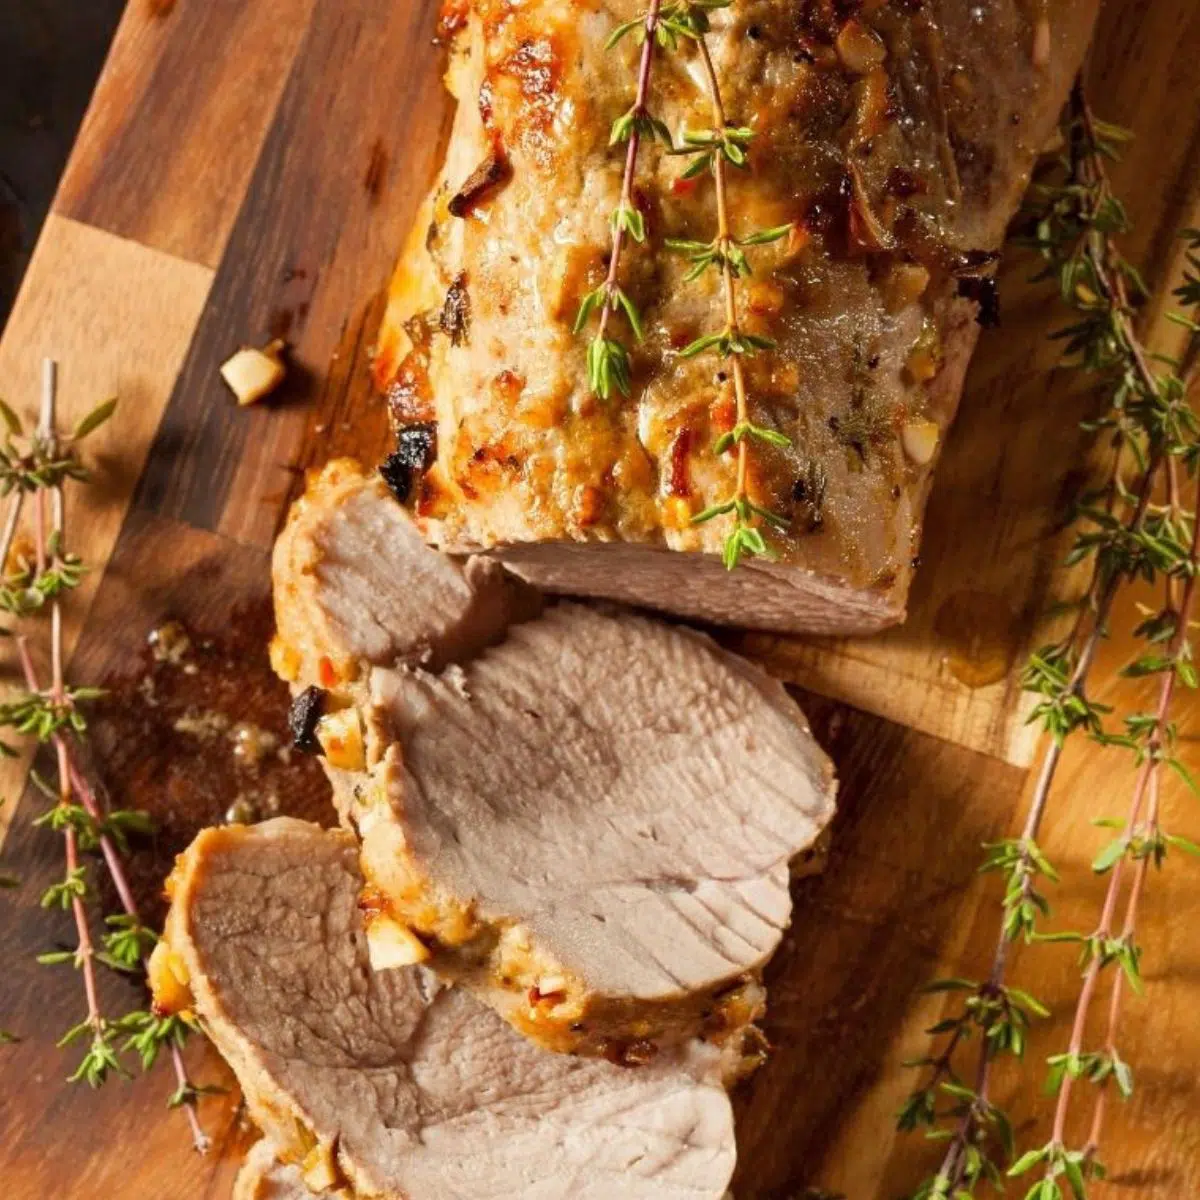 What to serve with pork tenderloin once roasted and garnished with fresh herbs.